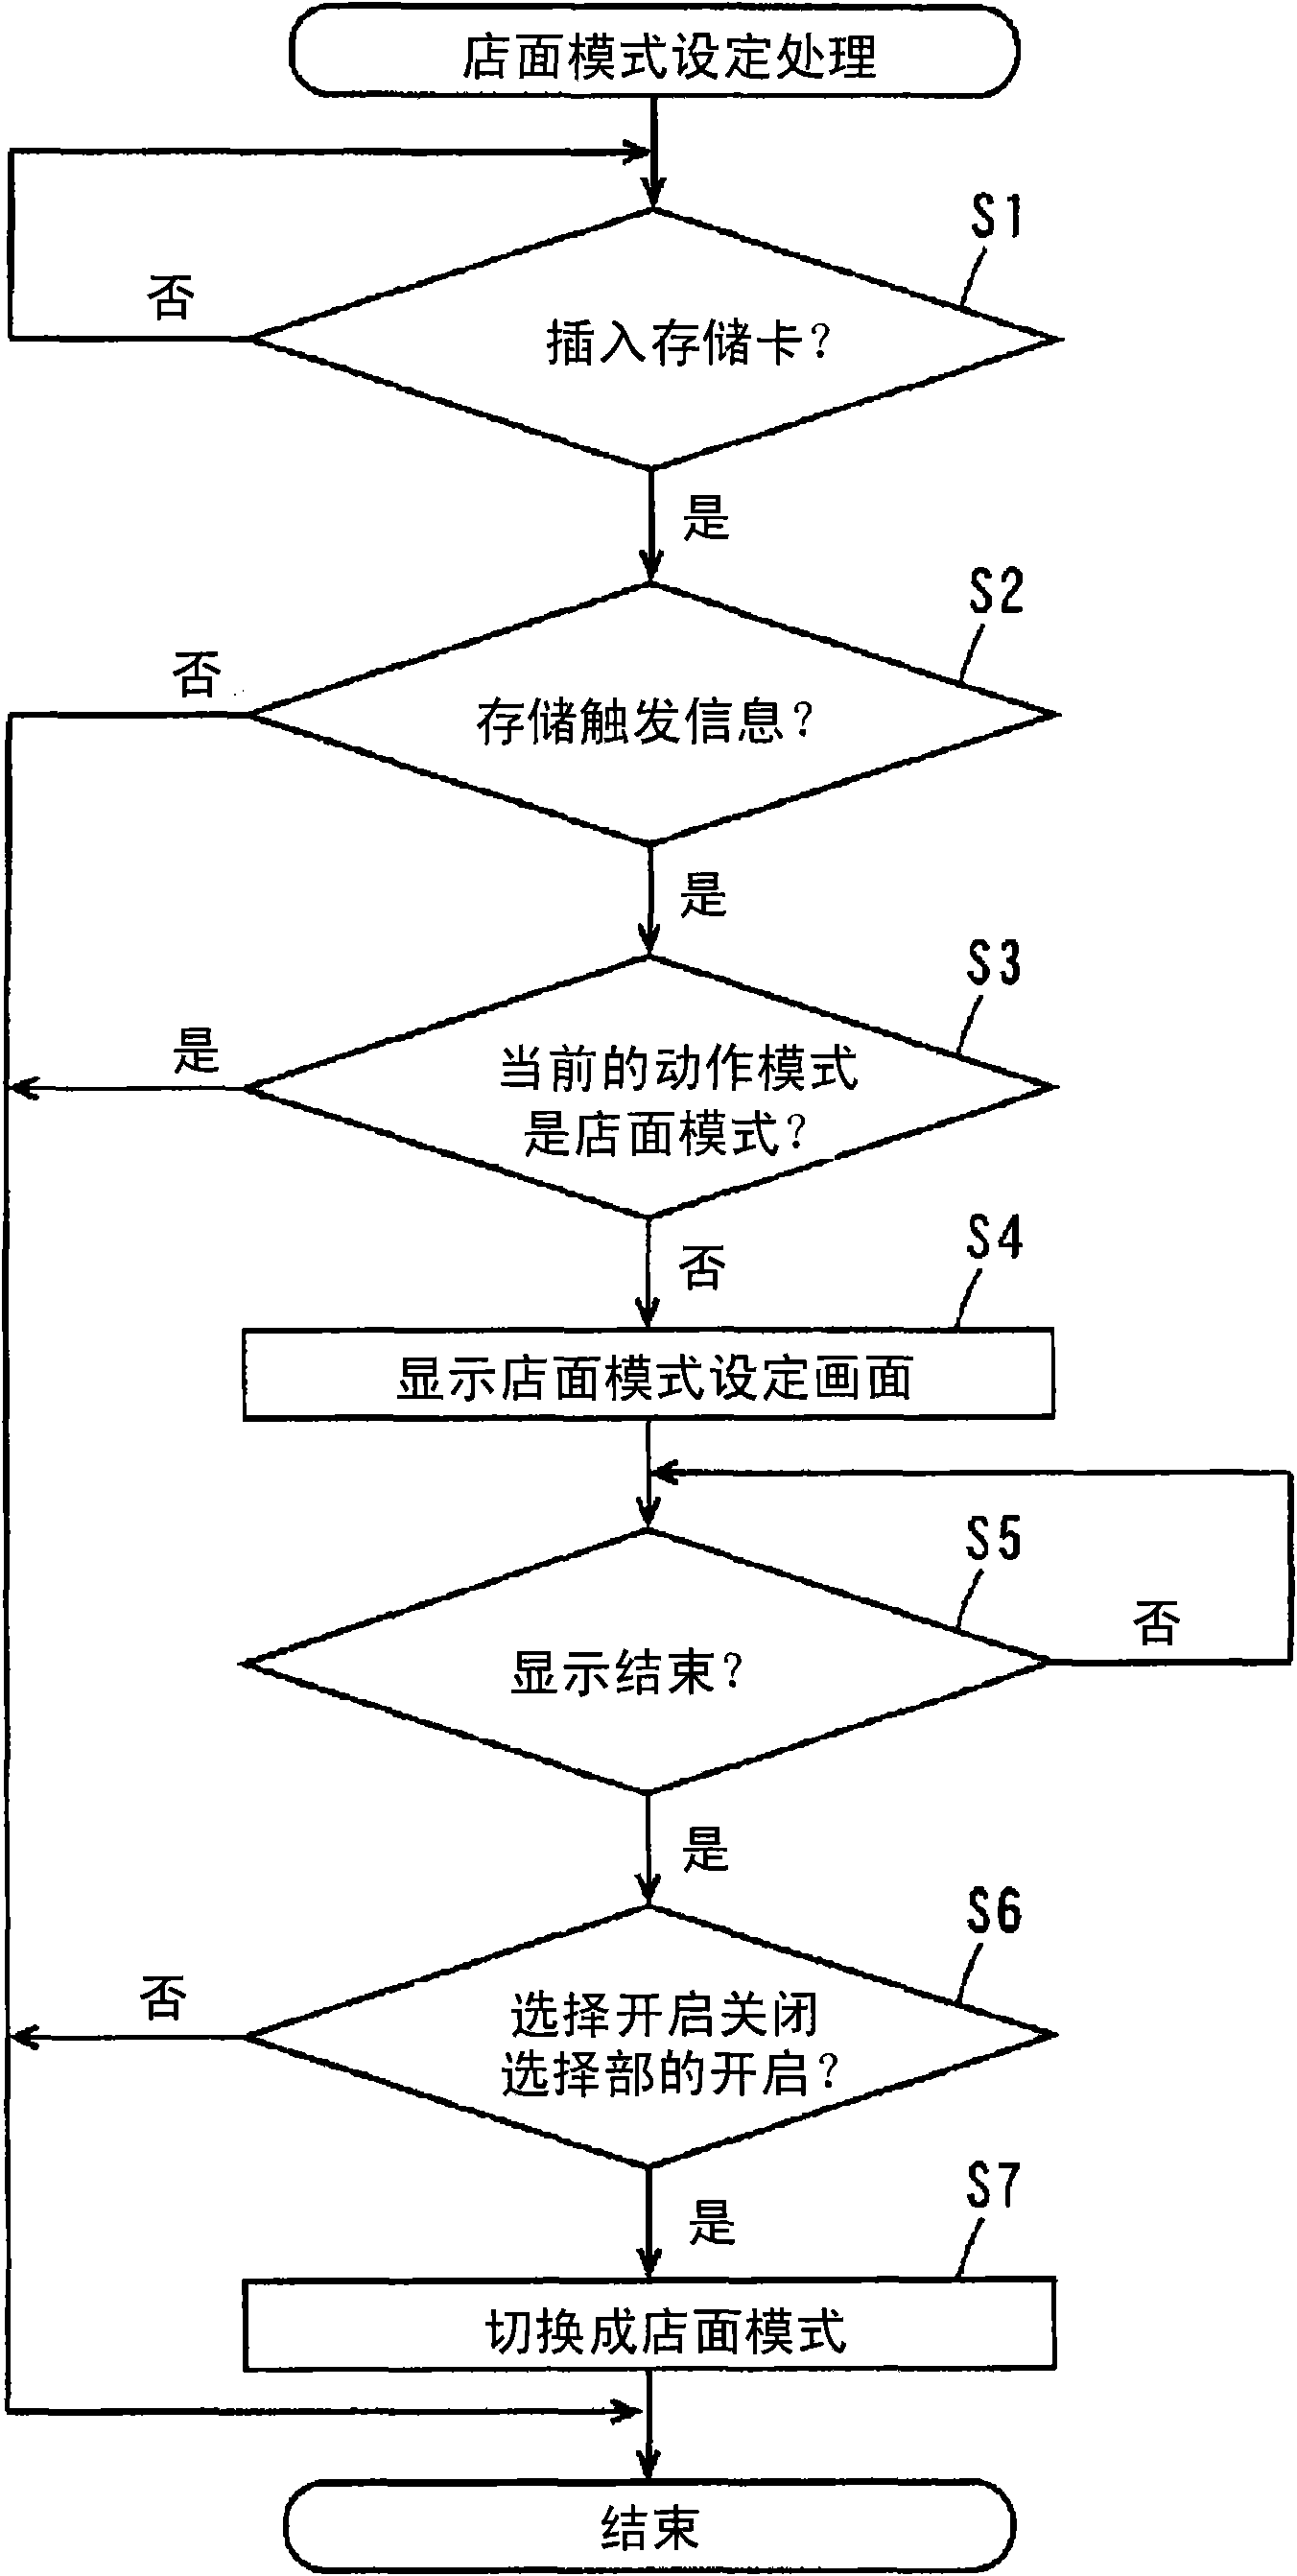 Display device and its control method